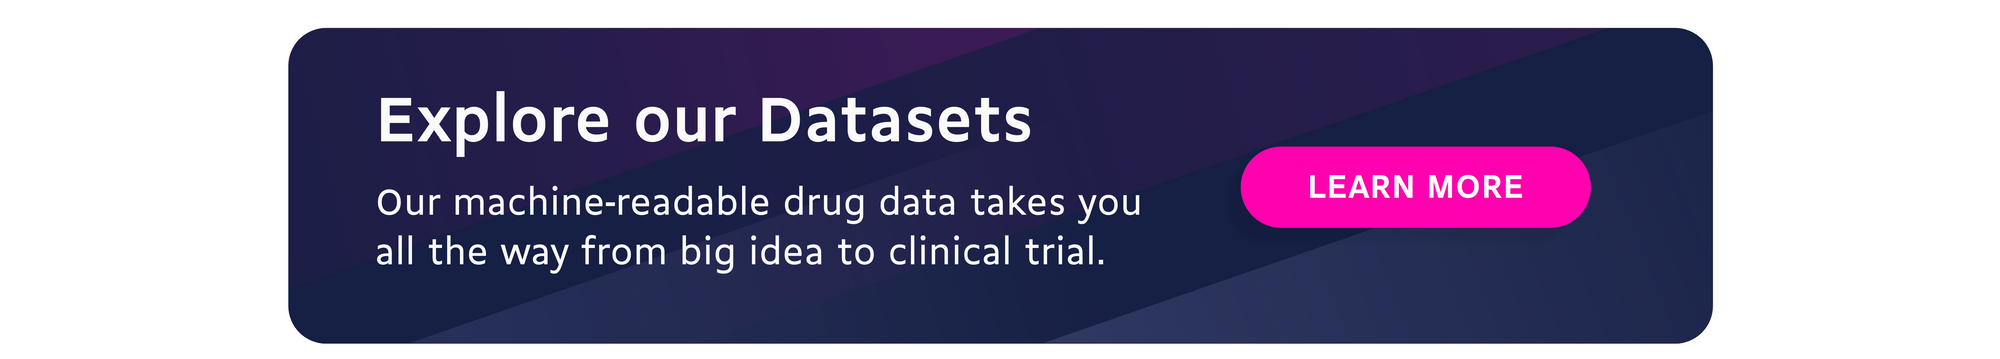 Explore our datasets: our machine-readable drug data takes you all the way from big idea to clinical trial.